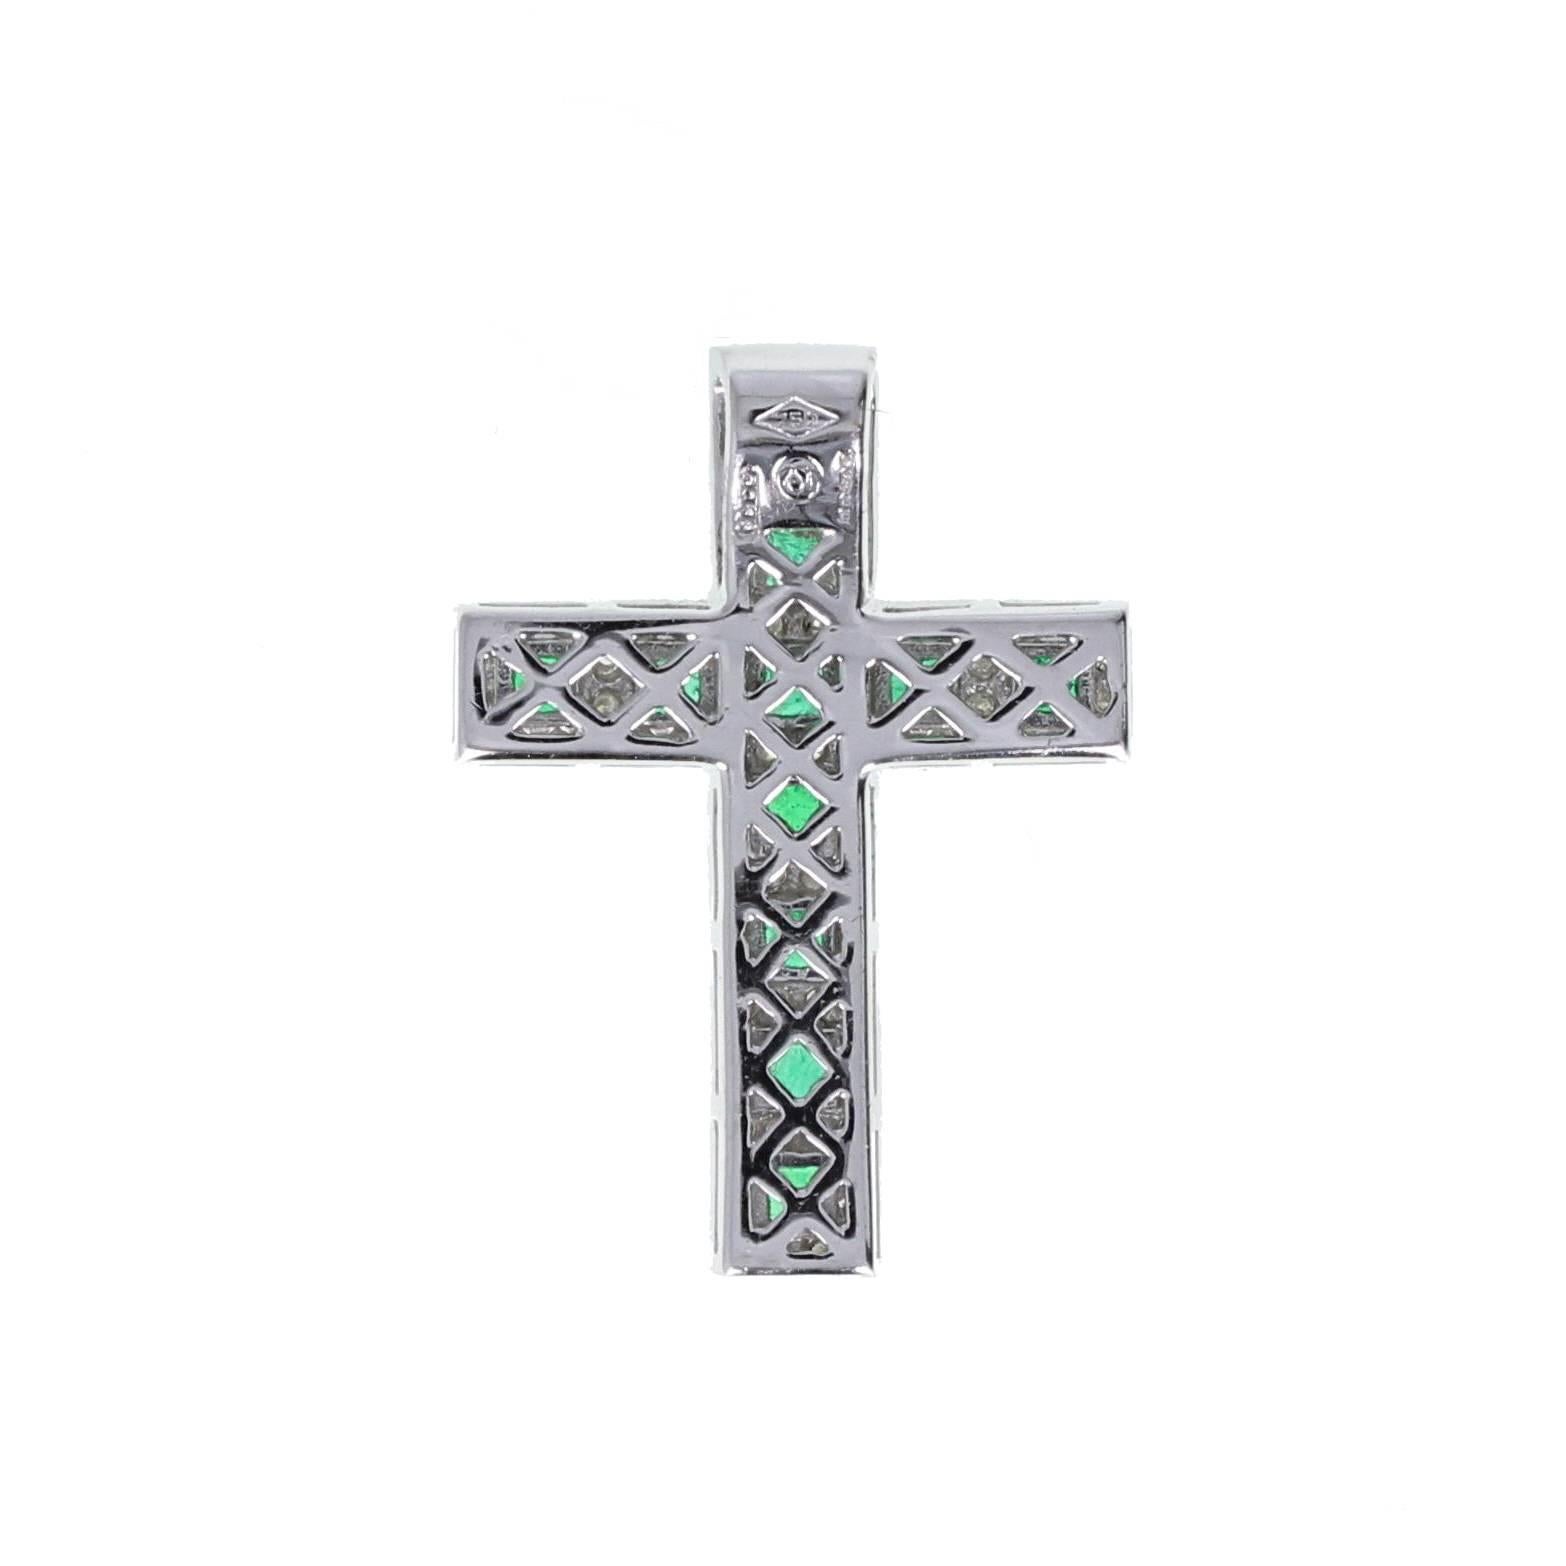 A bright and lively modern cross pendant in 18ct white gold featuring 11 square-cut, well matched emeralds set within a grid border of round-cut diamonds. London hallmark with date letter for 2003. Makers mark 'S & CJ'. 
Setting:
Tests as 18 carat